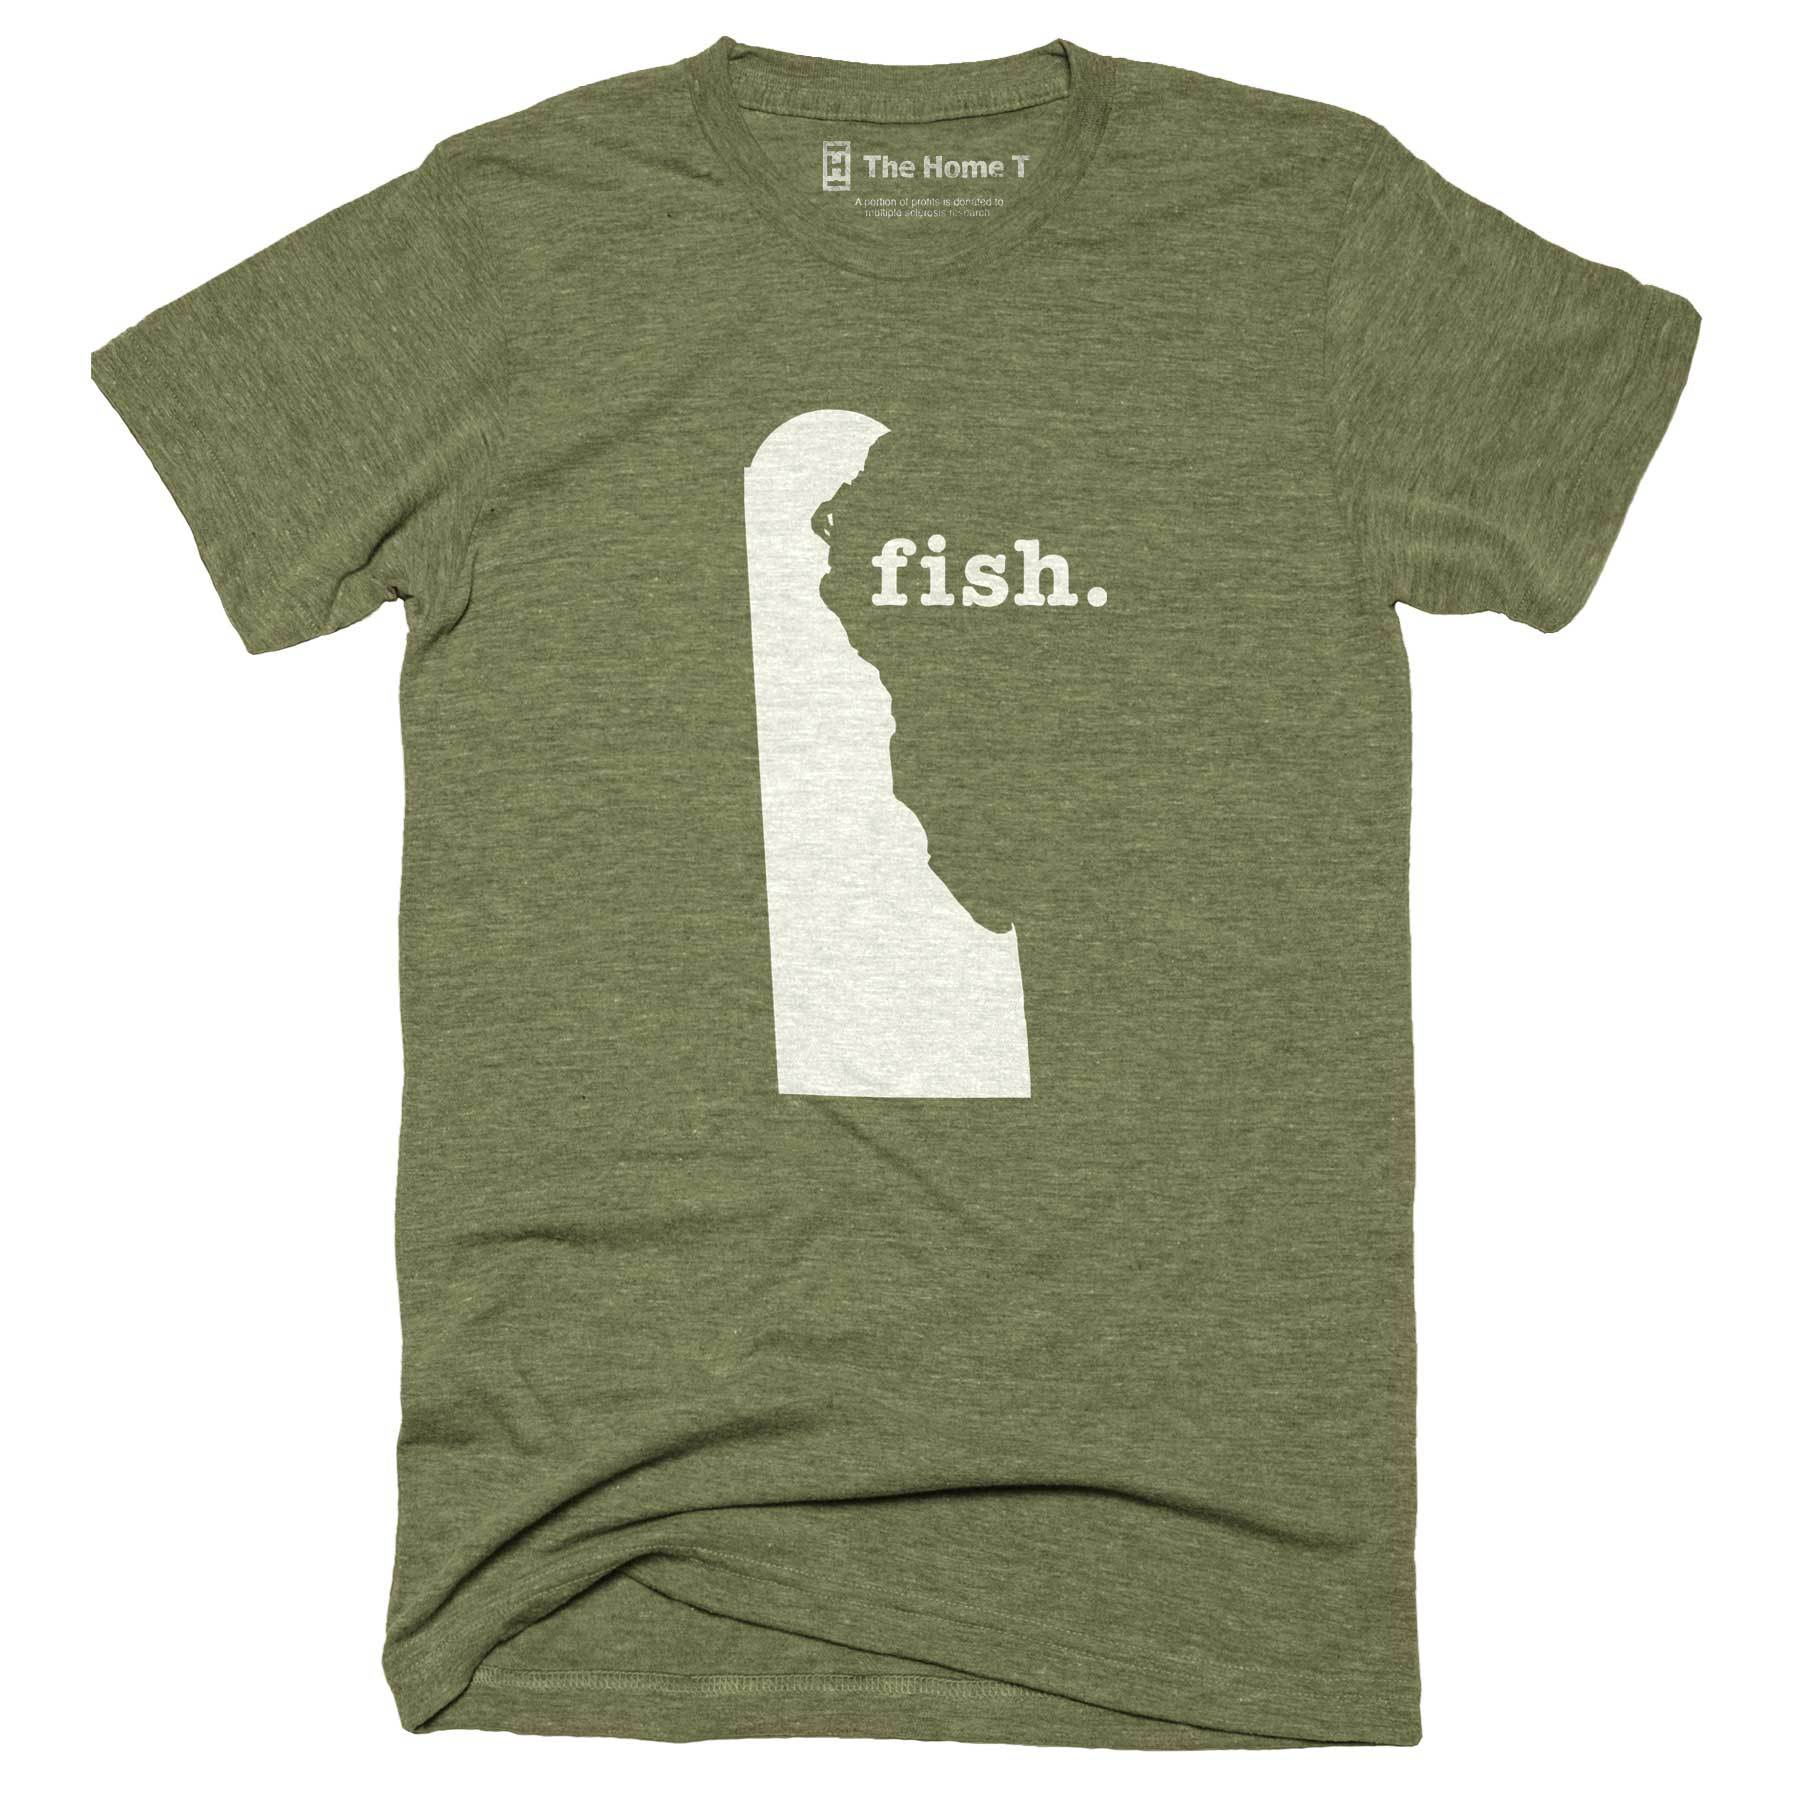 Delaware Fish Home T-Shirt Outdoor Collection The Home T XXL Army Green